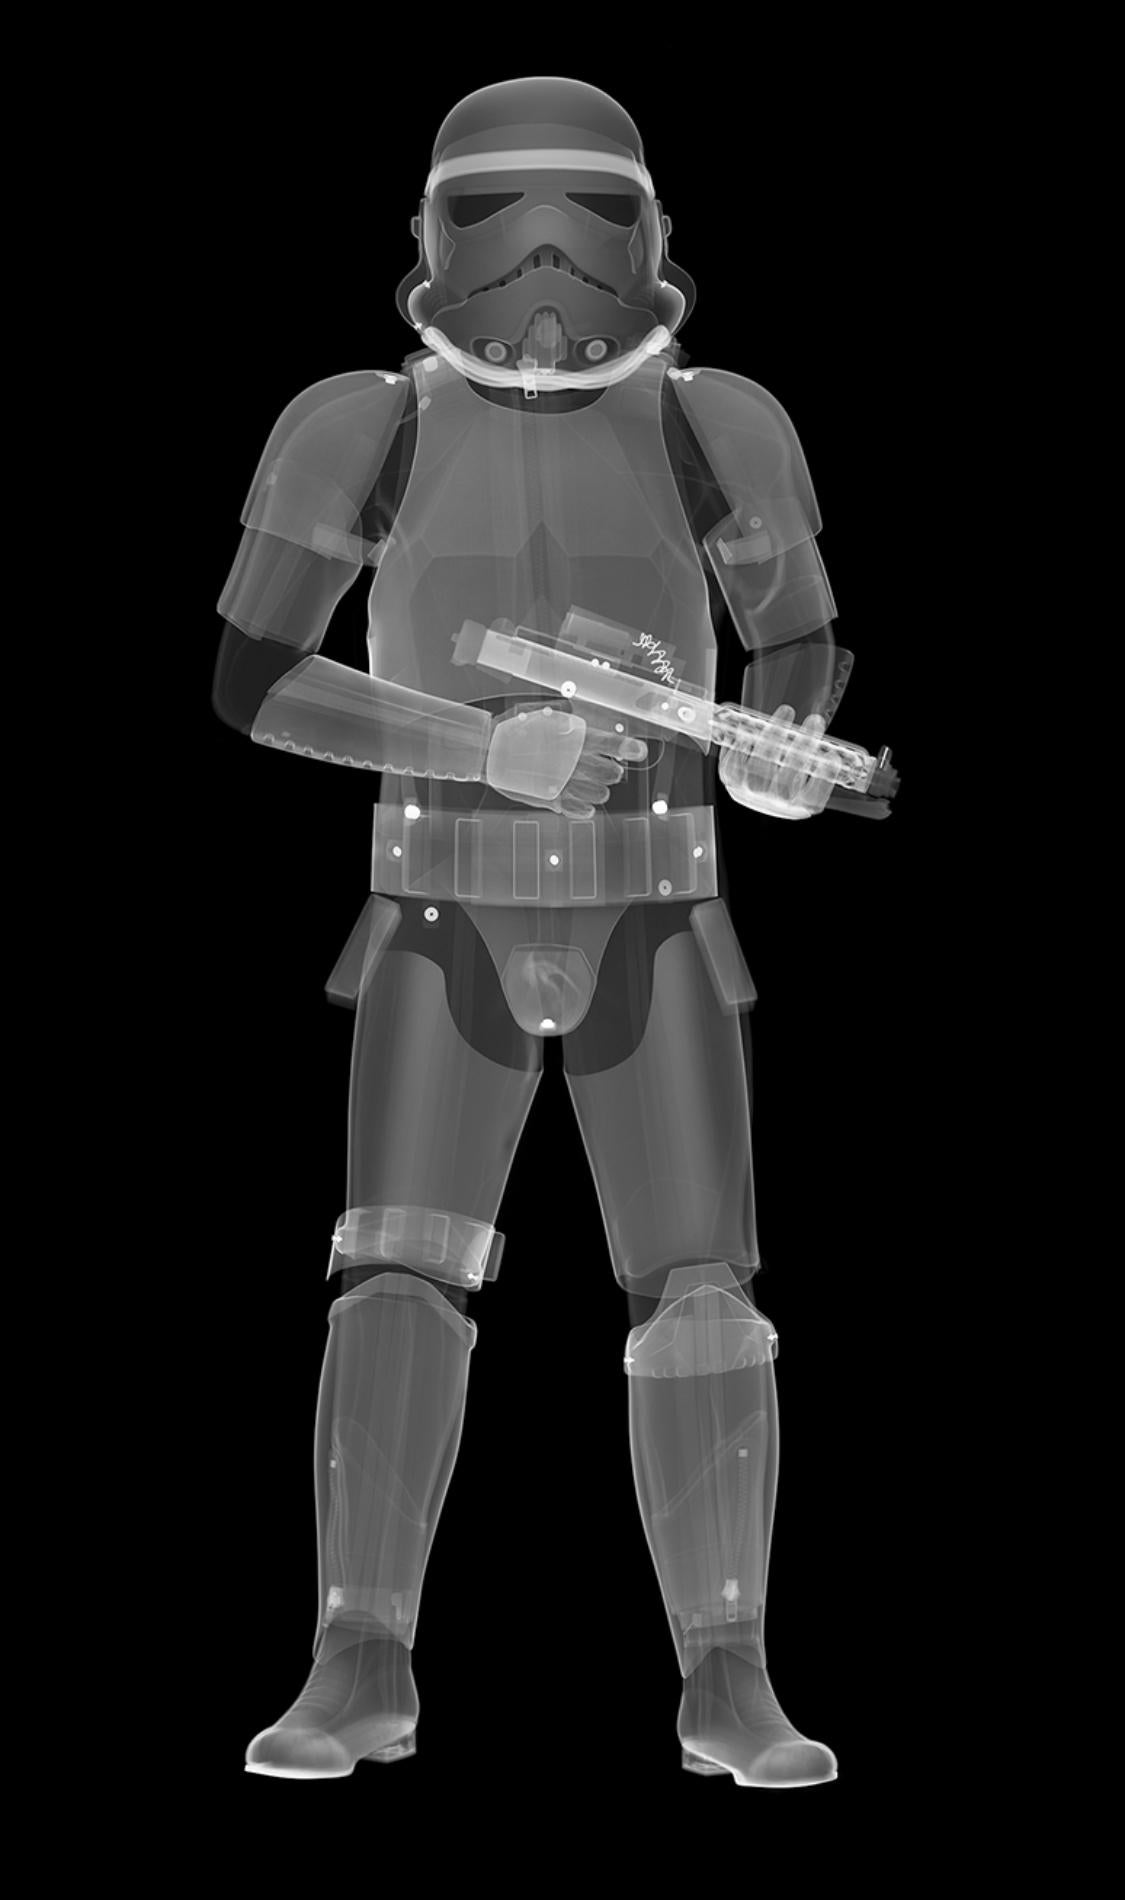 Nick Veasey Black and White Photograph - X-Ray StormTrooper with plexiglas face mounted on dibond